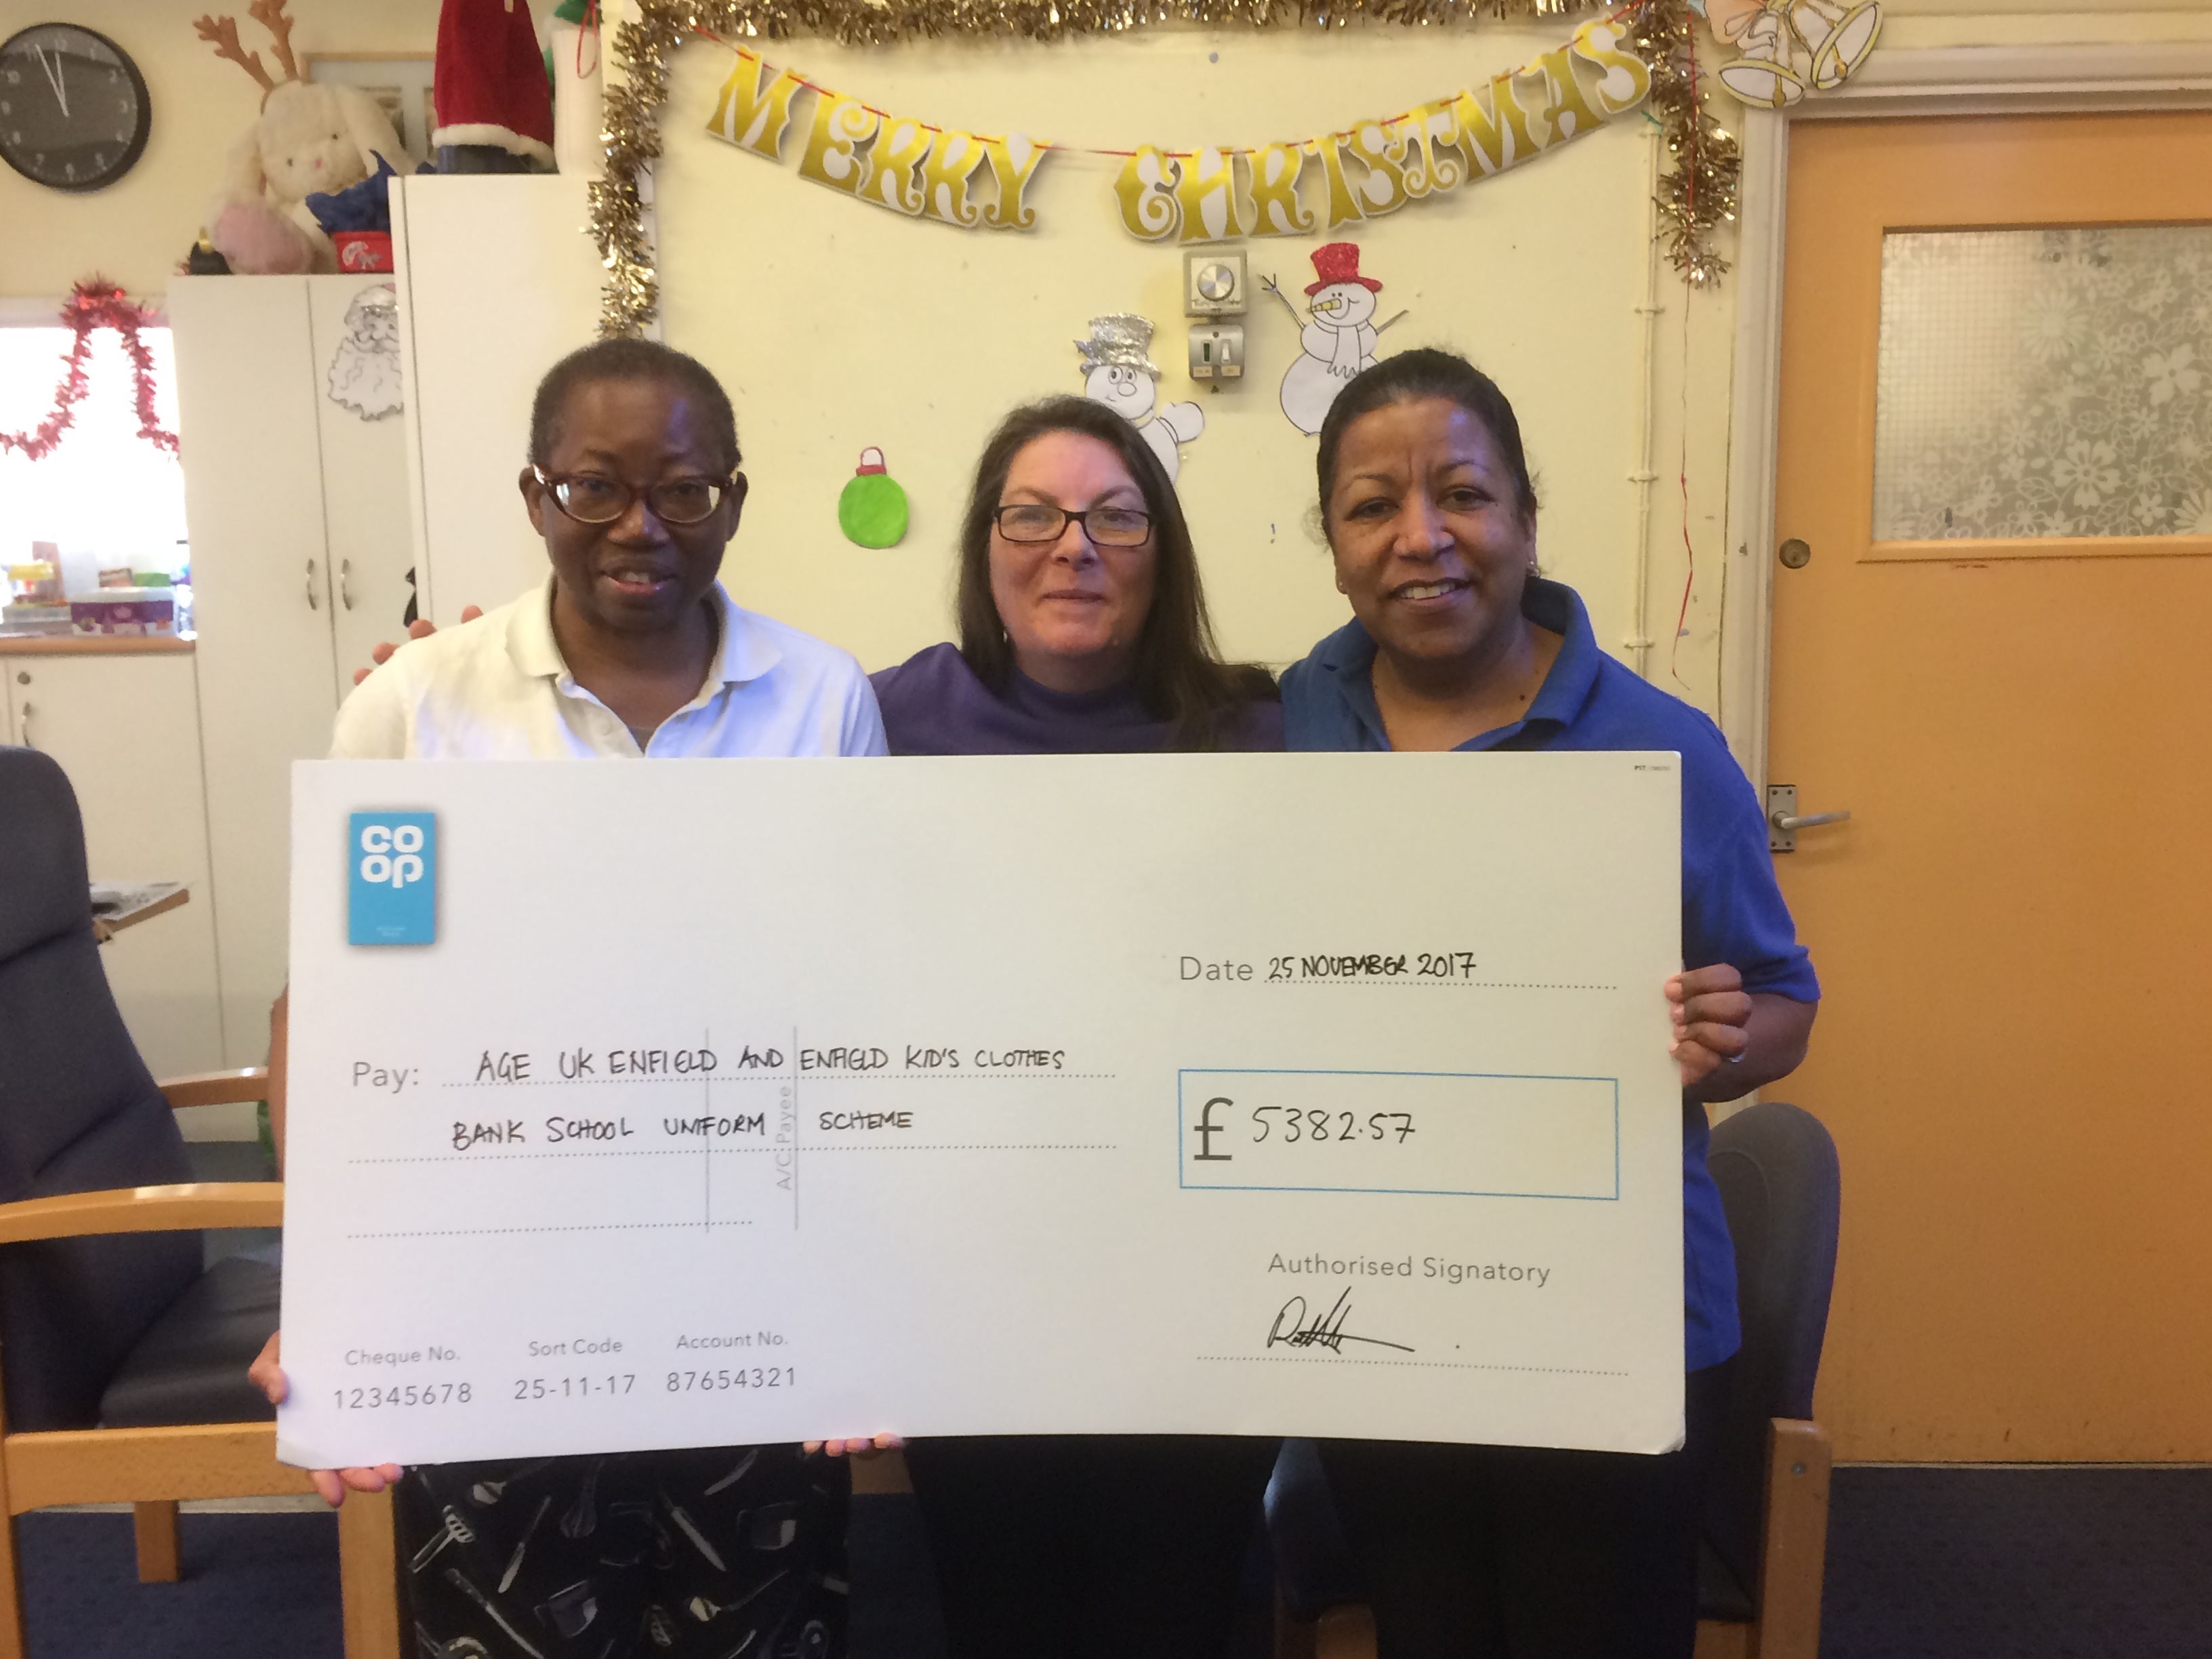 Cheque received from The Coop fundraising team